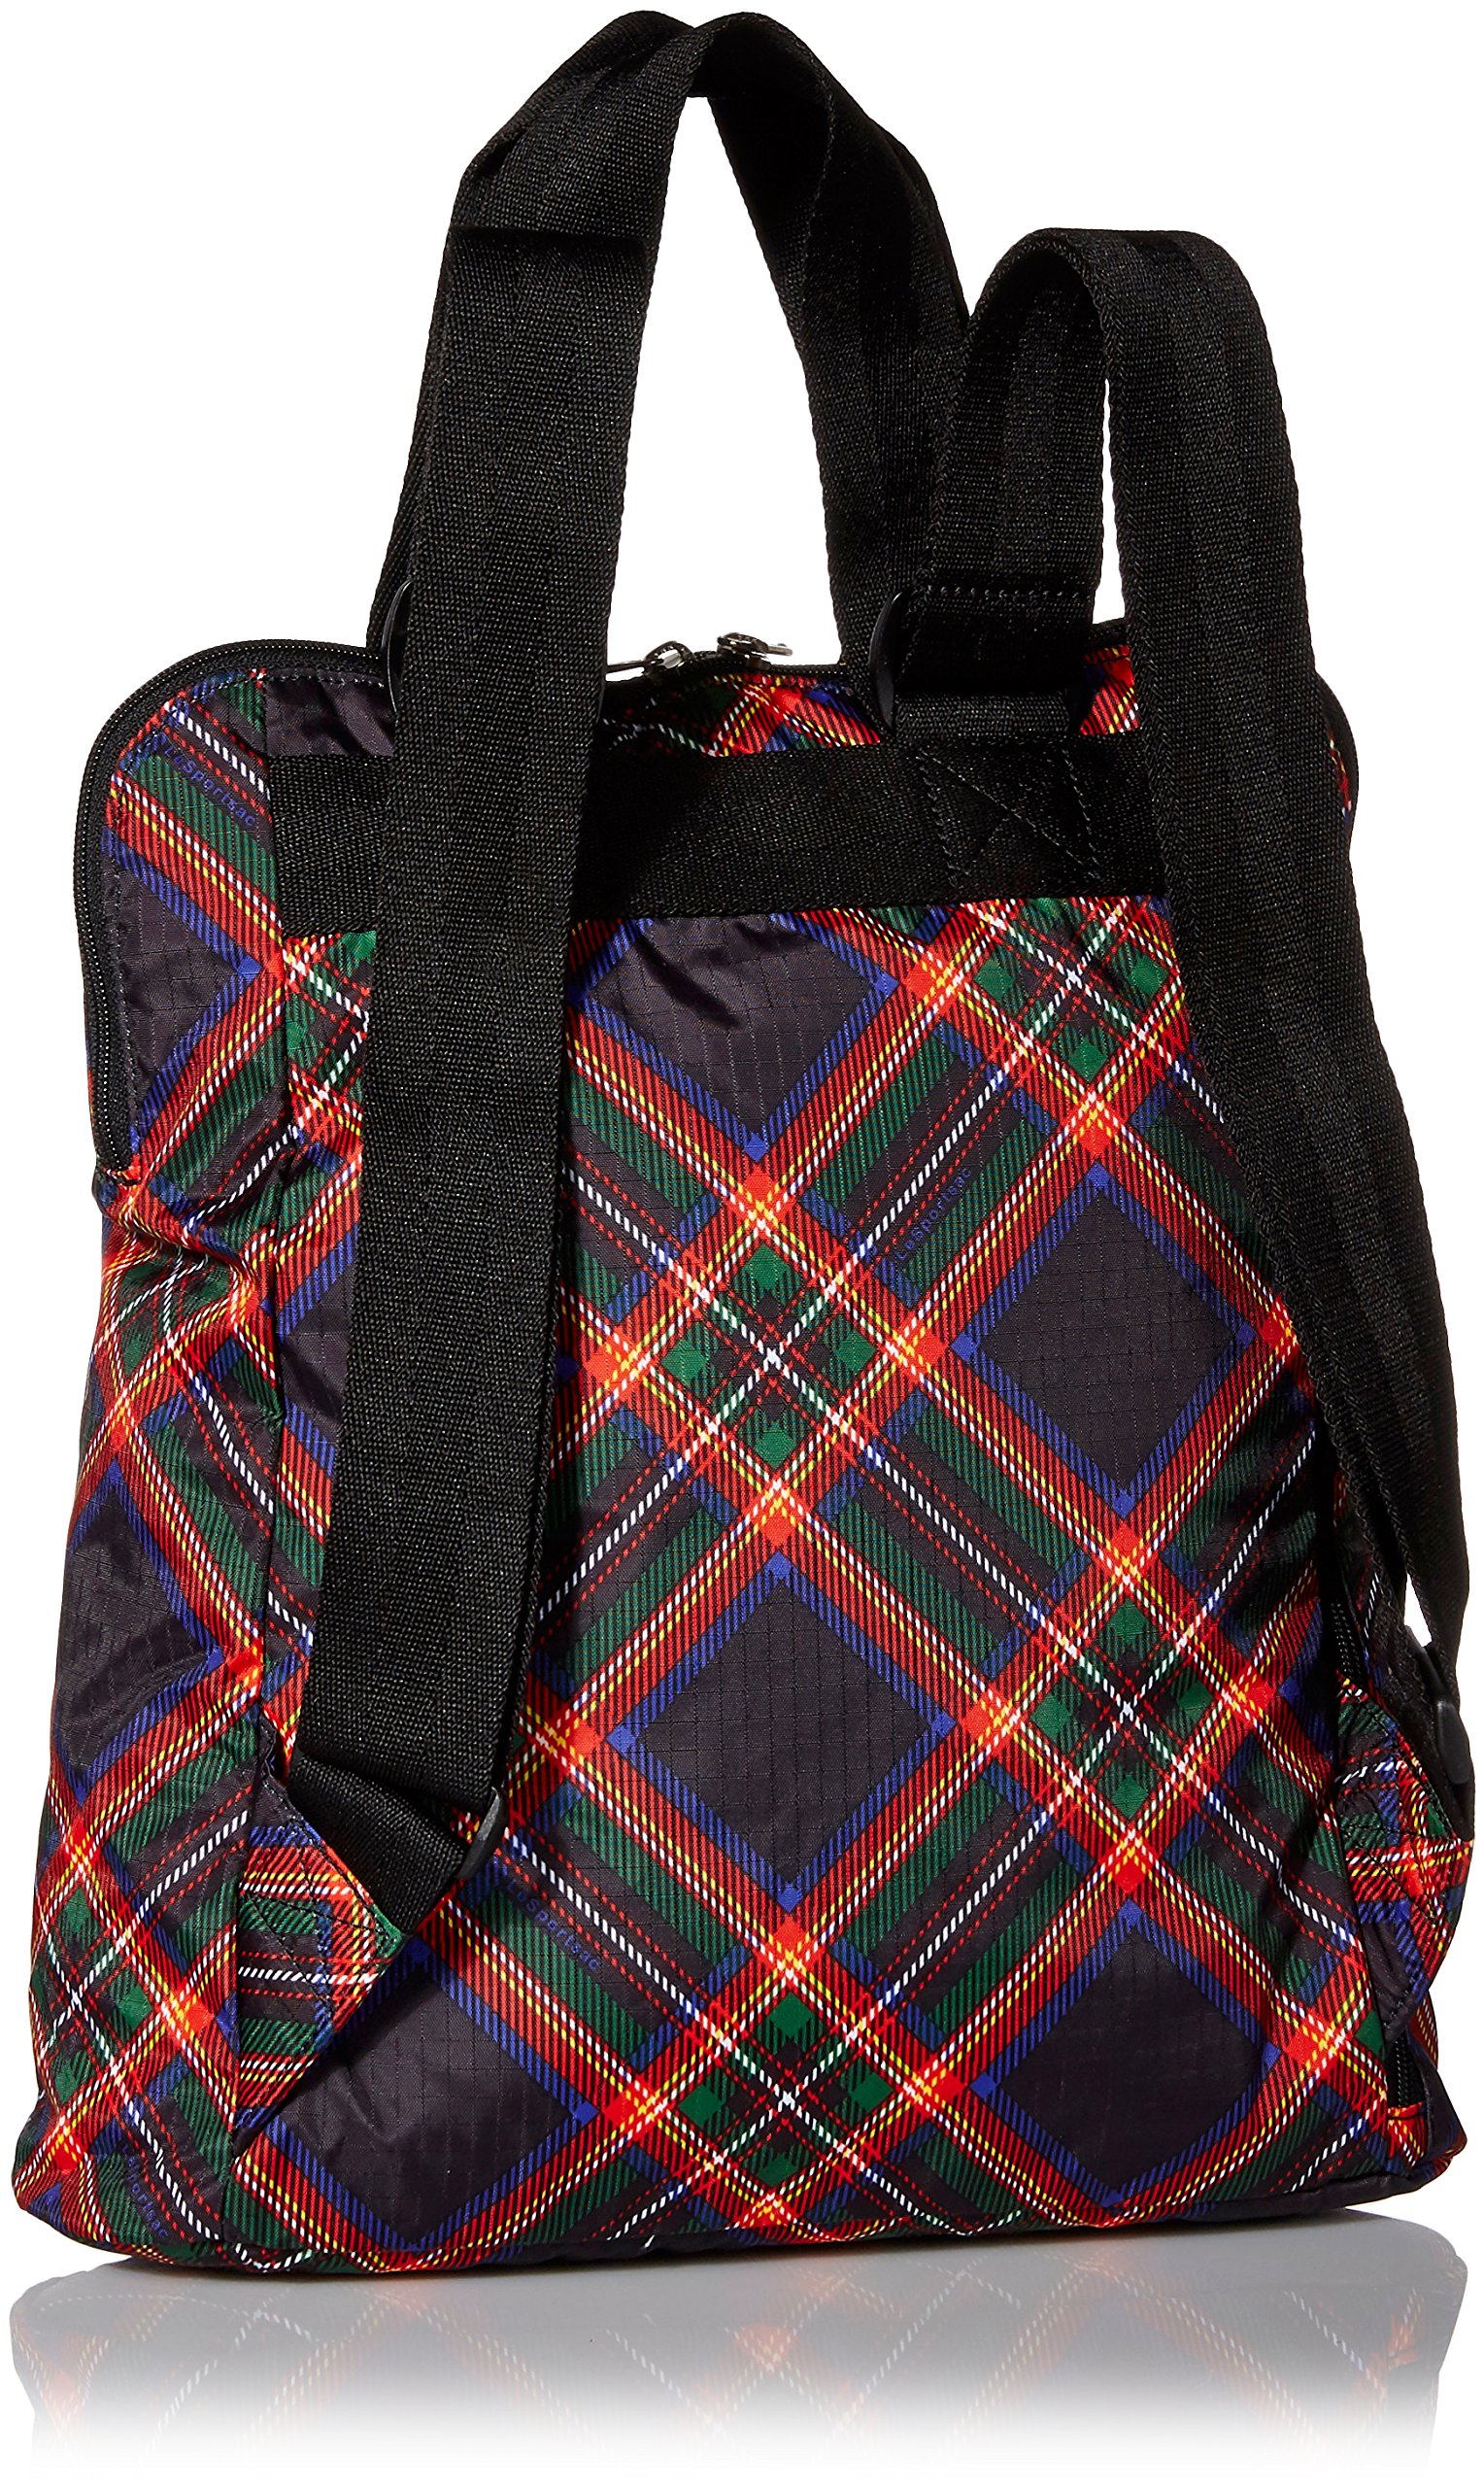 Everyday Backpack (Cozy Plaid Black) - image 4 of 4